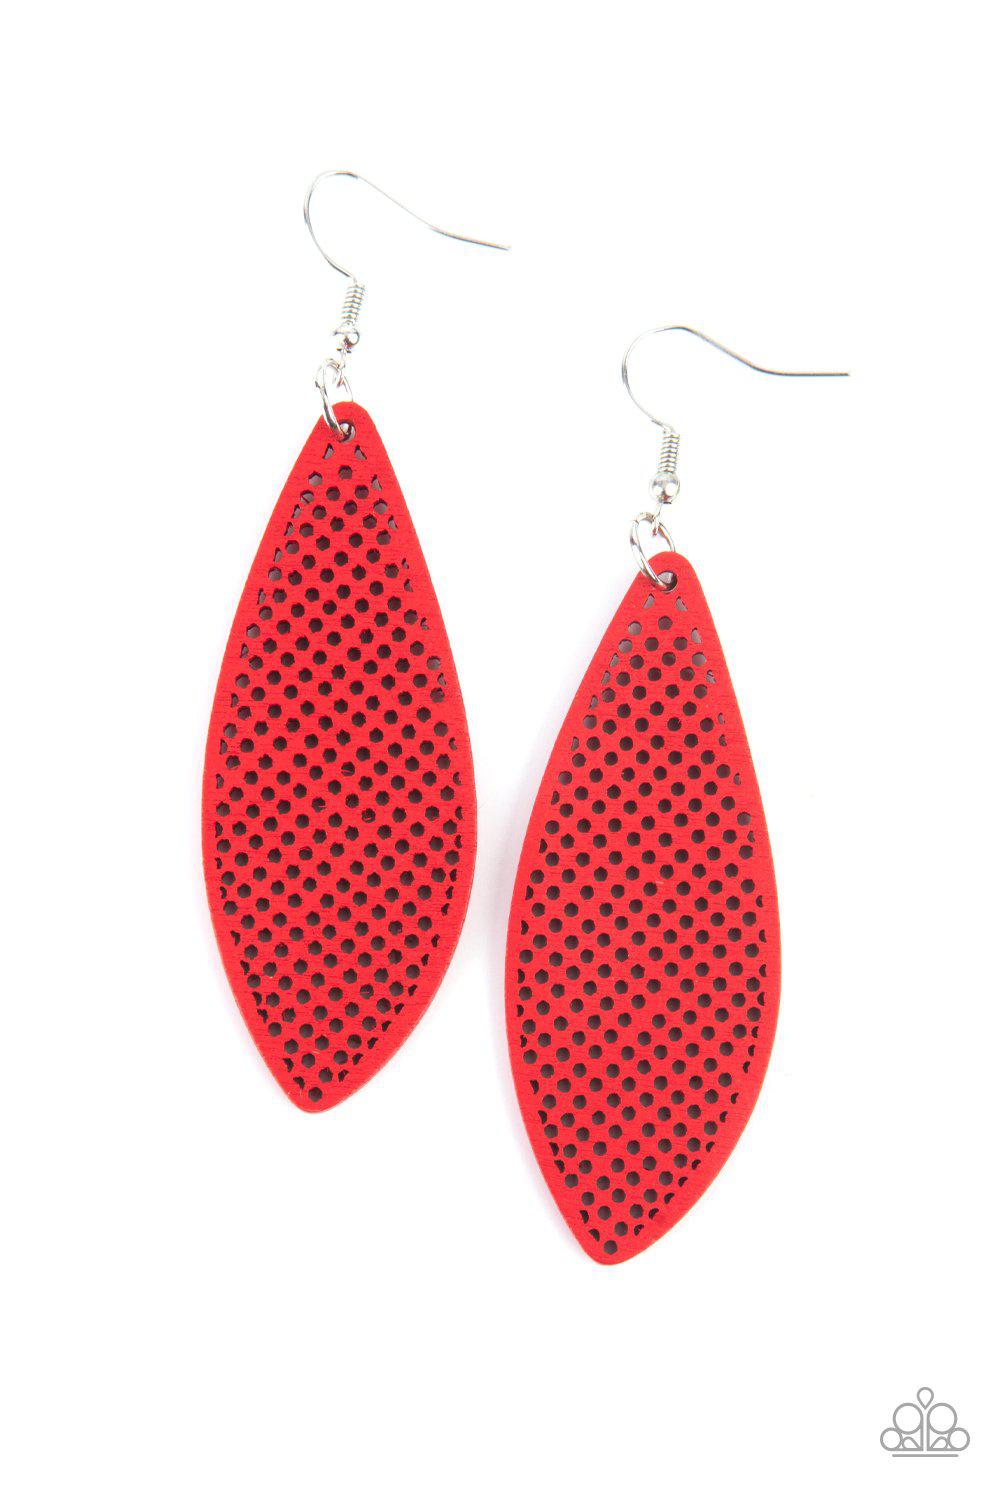 Surf Scene Red Wood Earrings - Paparazzi Accessories- lightbox - CarasShop.com - $5 Jewelry by Cara Jewels